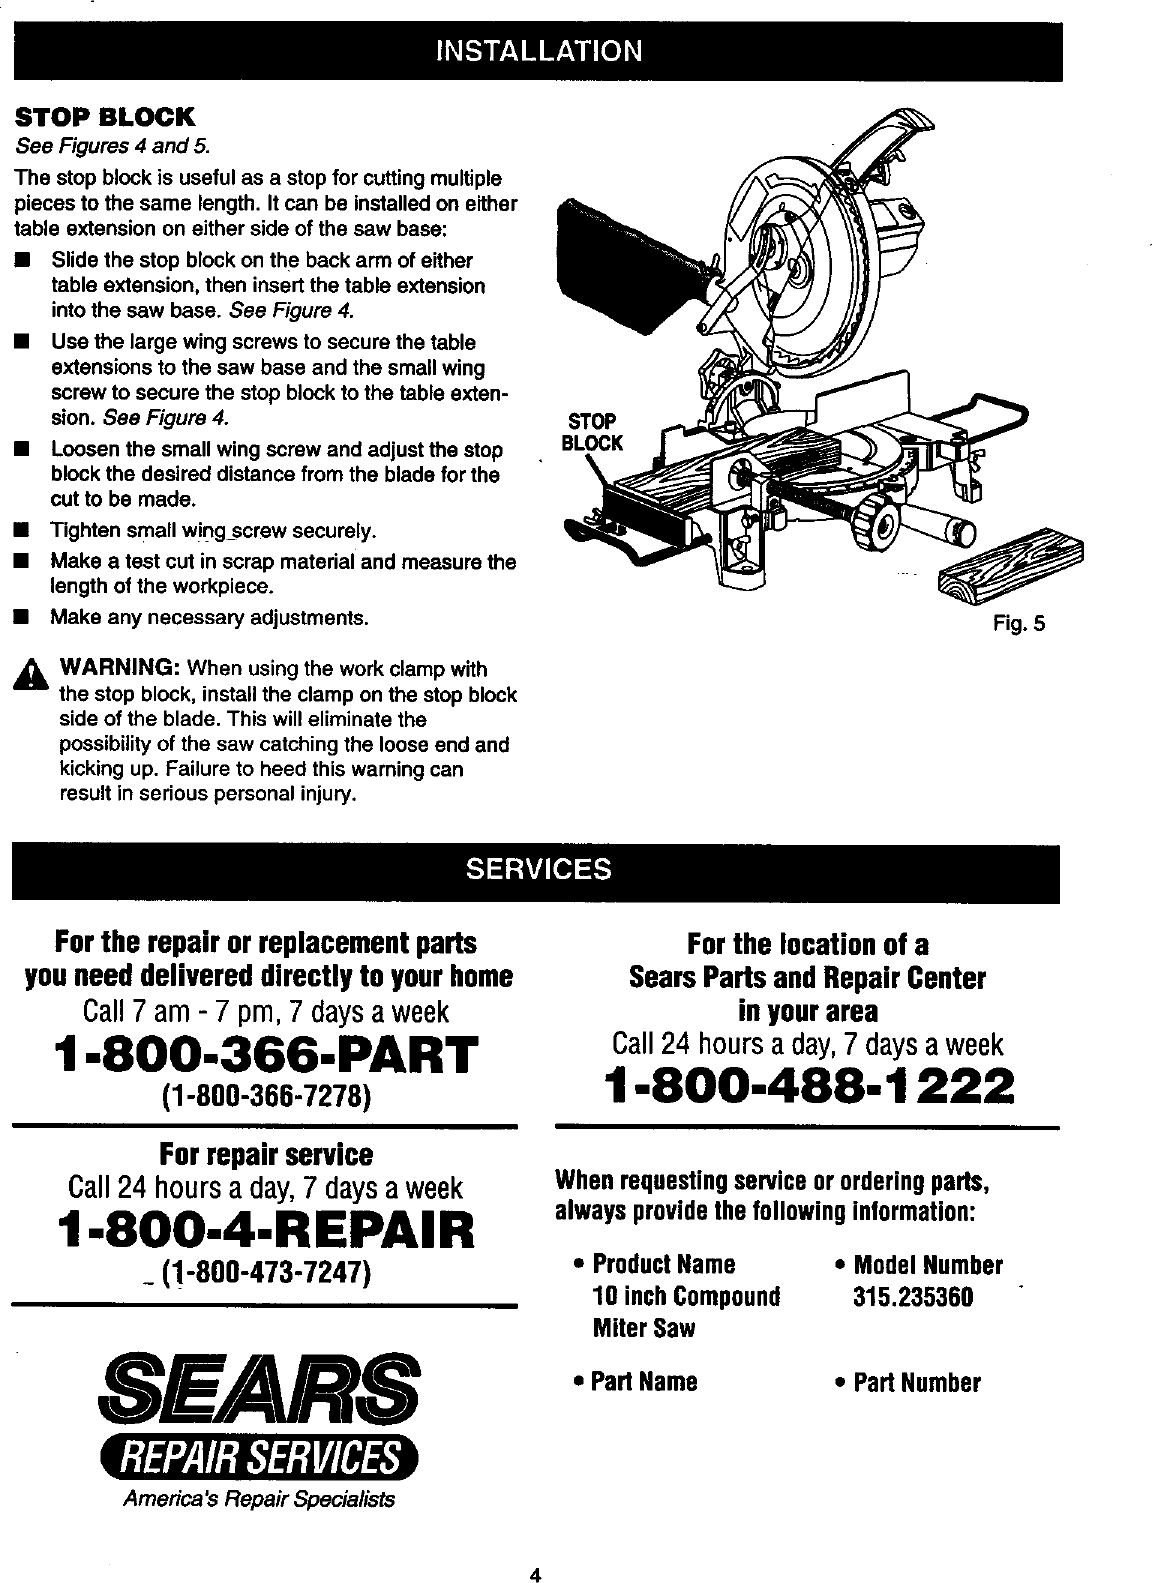 Page 4 of 4 - Craftsman 315235360 User Manual  ACCESSORIES FOR COMPOUND MITER SAW - Manuals And Guides 98110088